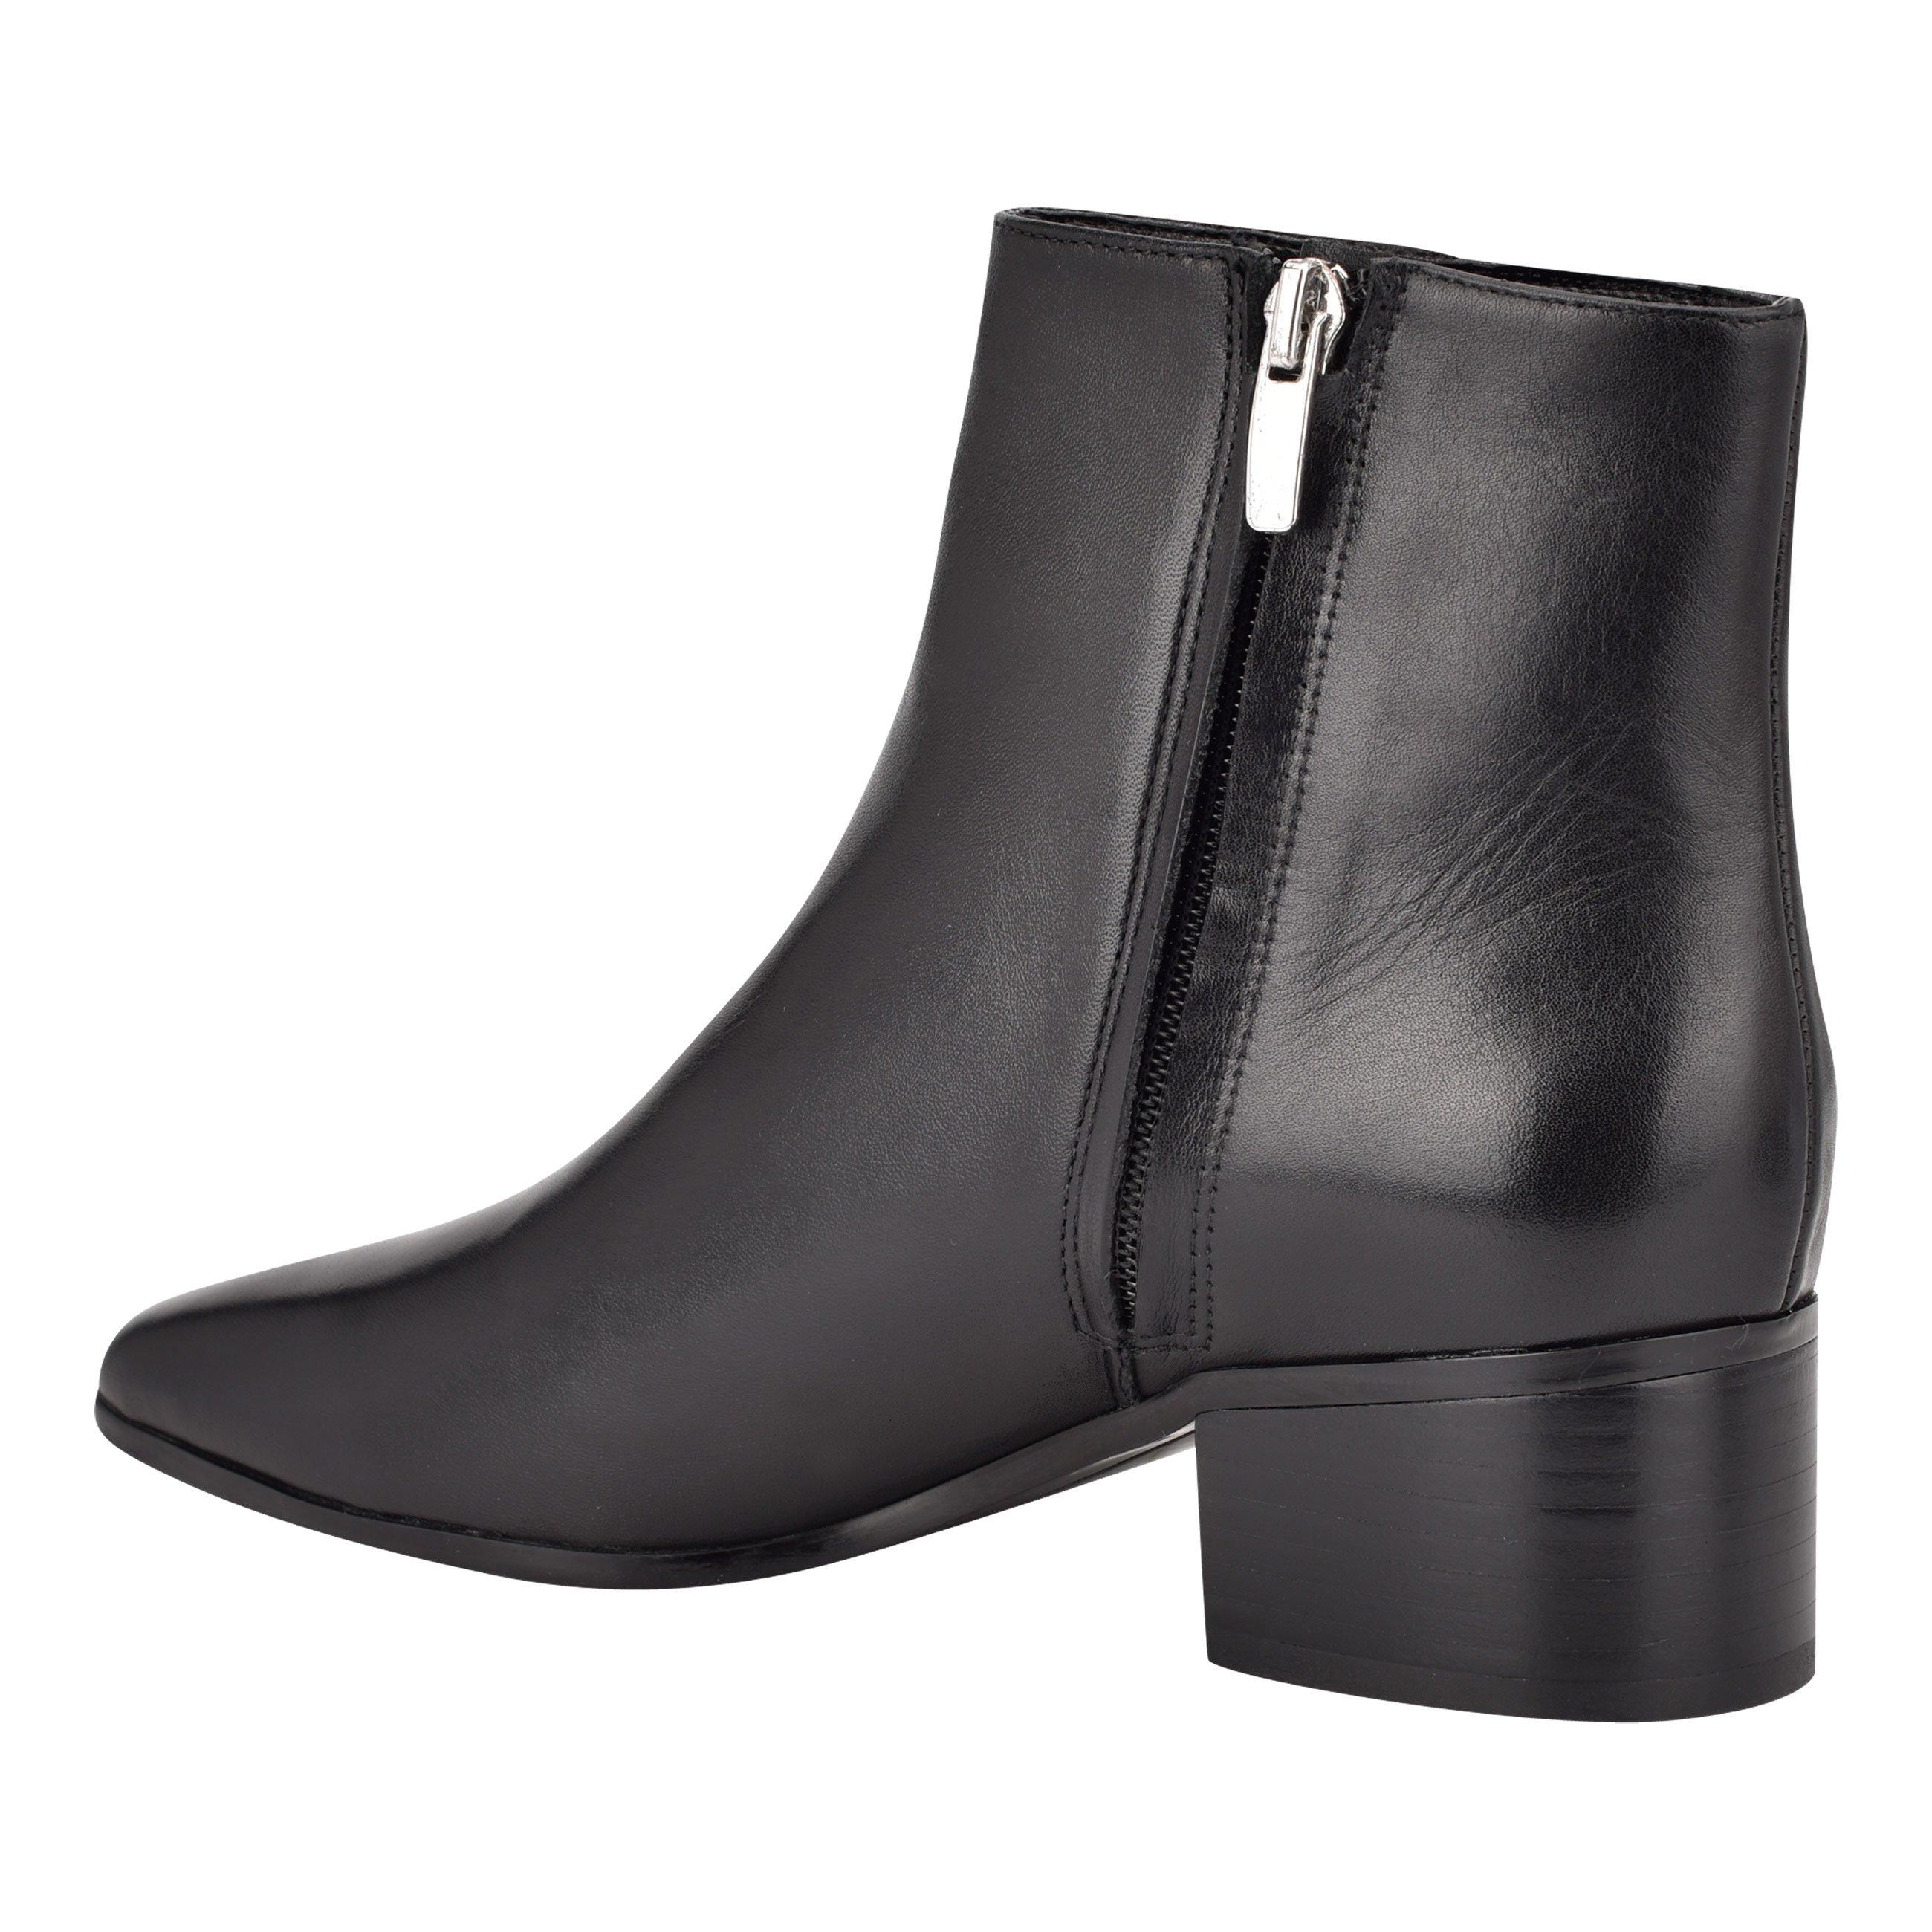 Nine West Cabra Square-toe Booties in Black Leather (Black) - Lyst